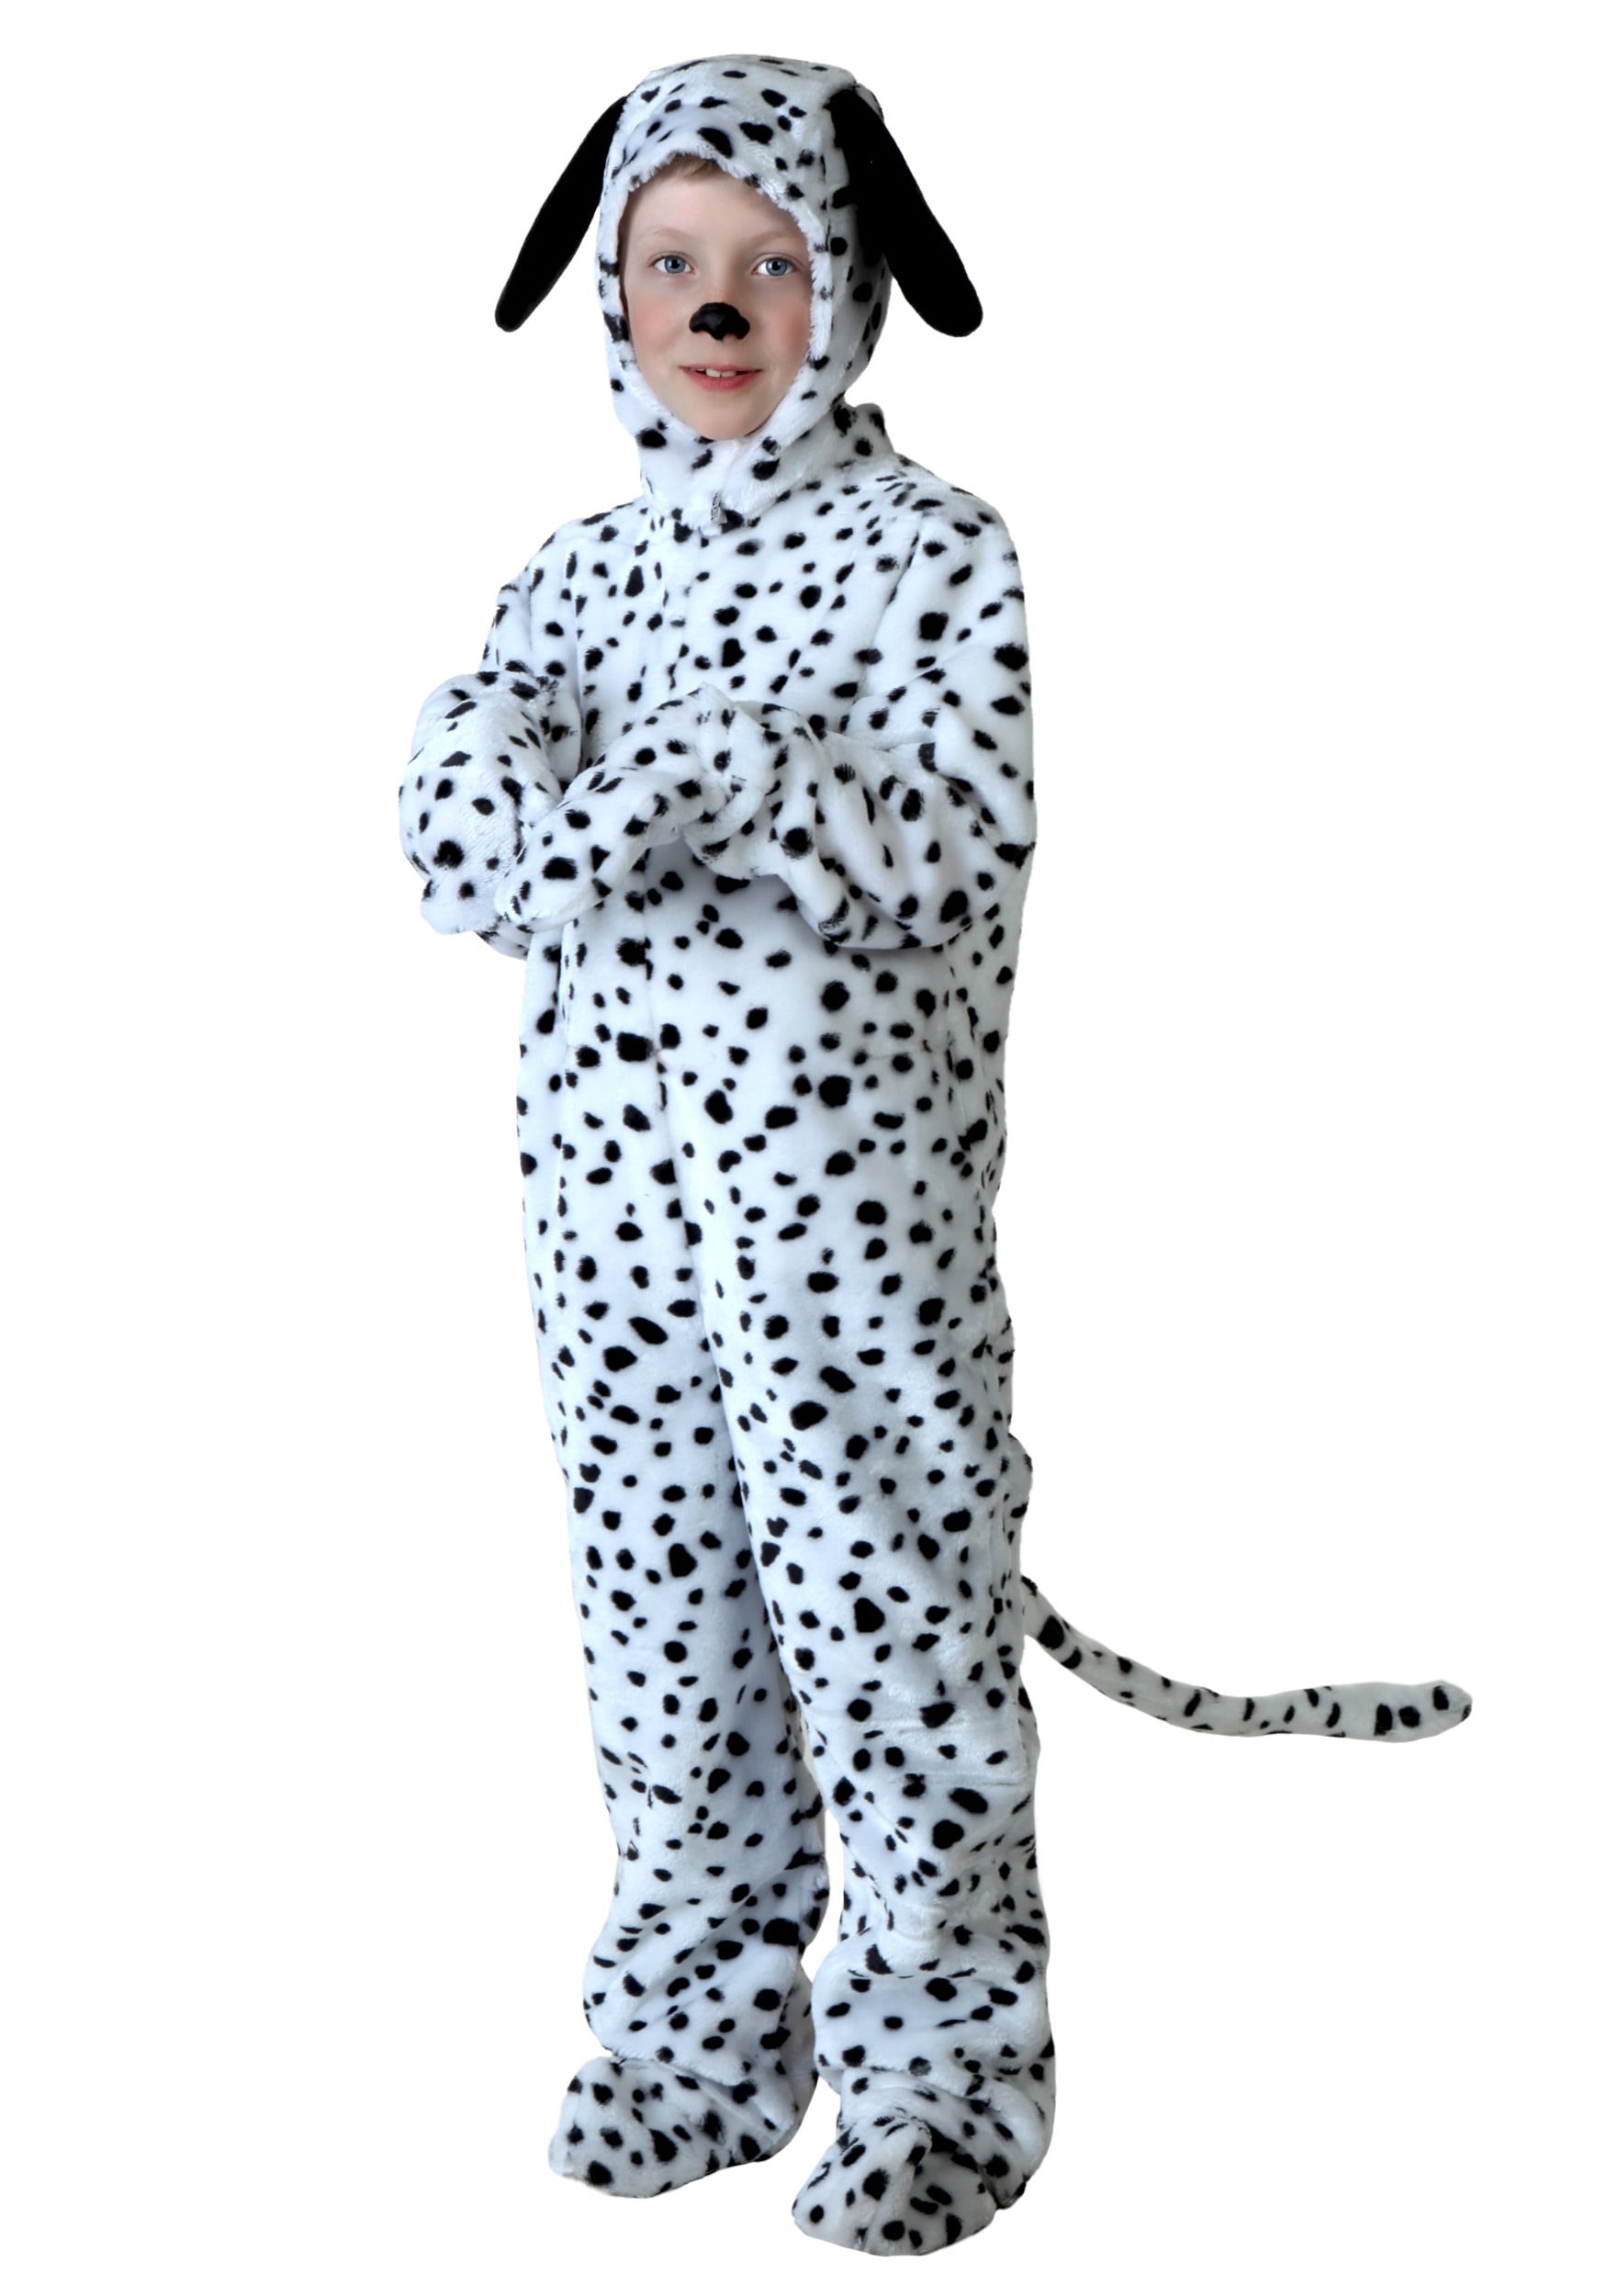 Kids Dalmatian Spotted Dog Hooded Jumpsuit & Tail Child Costume Spots SM-LG